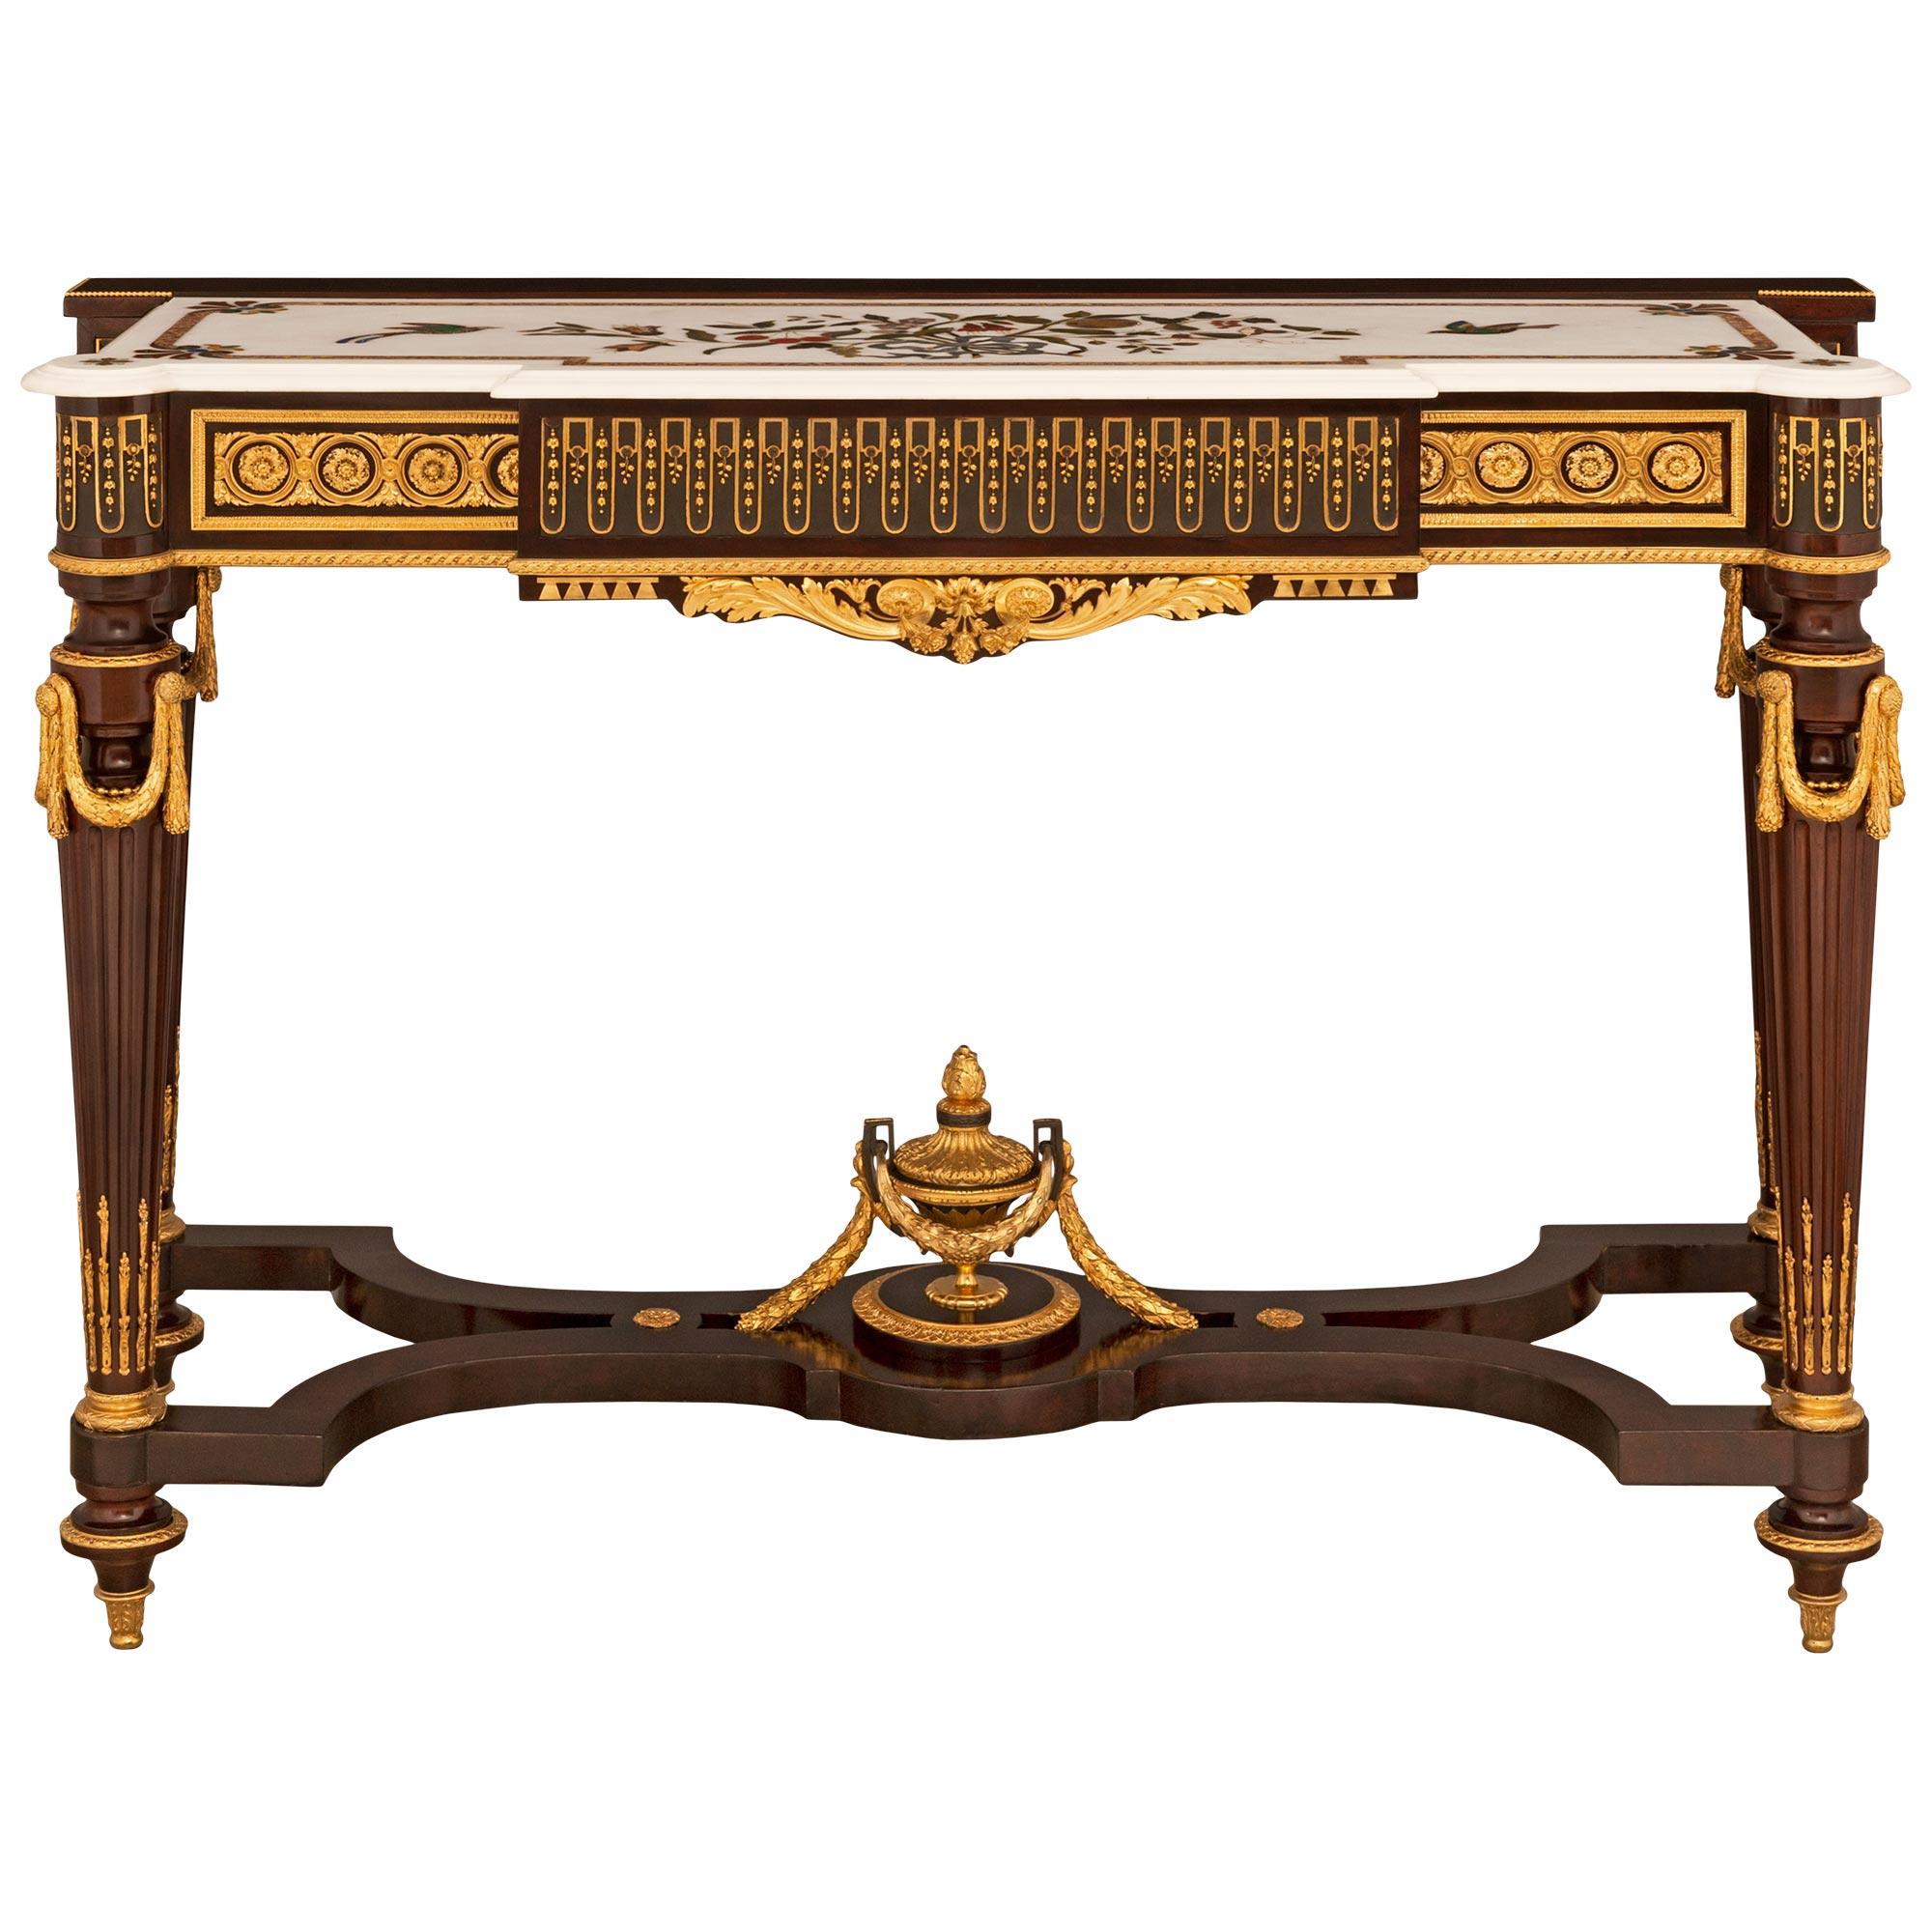 French 19th Century Napoleon III Period Mahogany, Ormolu and Marble Console For Sale 5